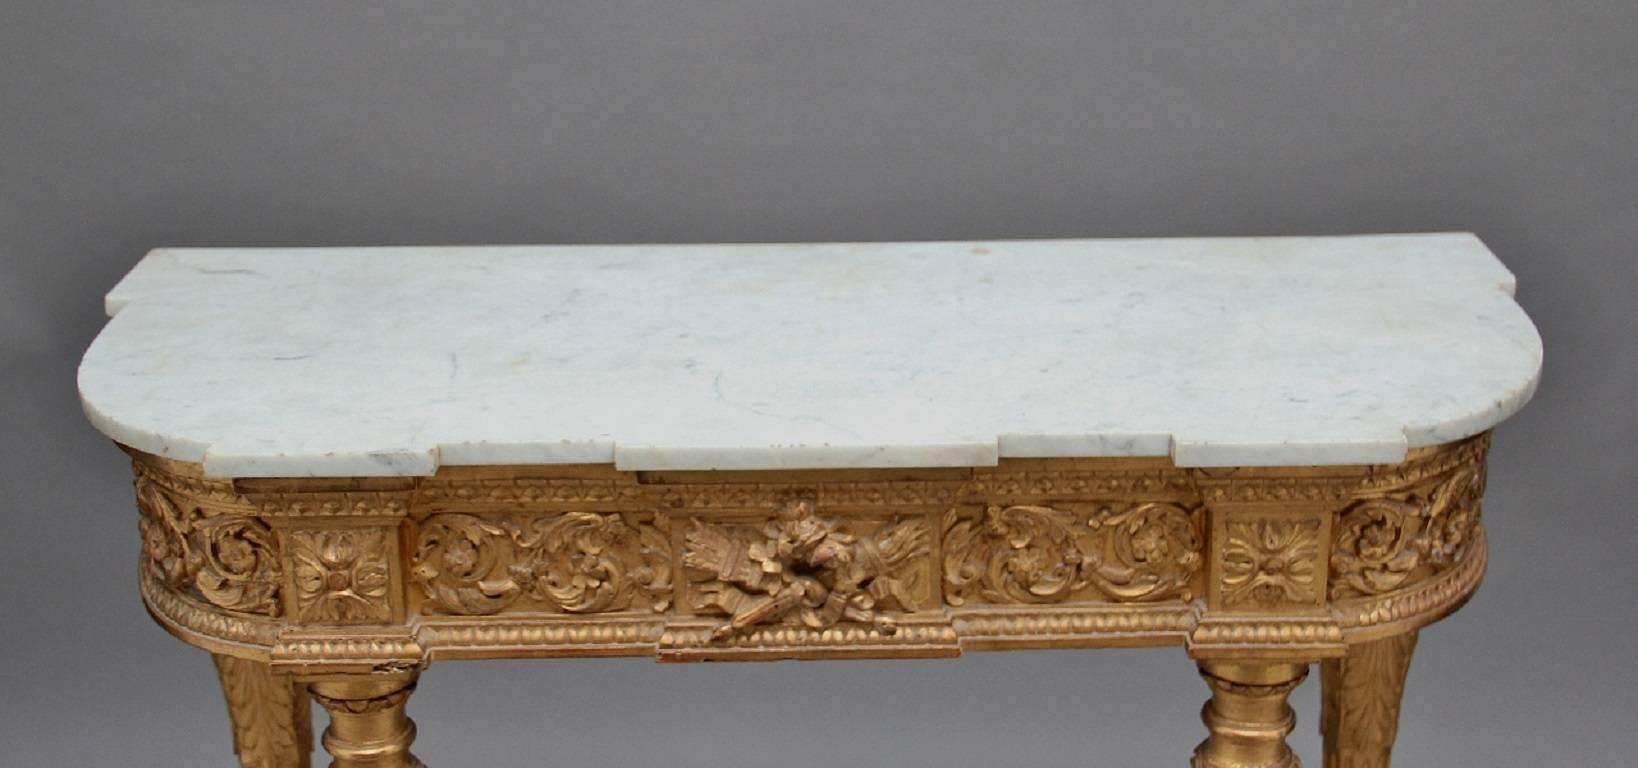 19th Century Gilt and Marble-Top Console Table 1